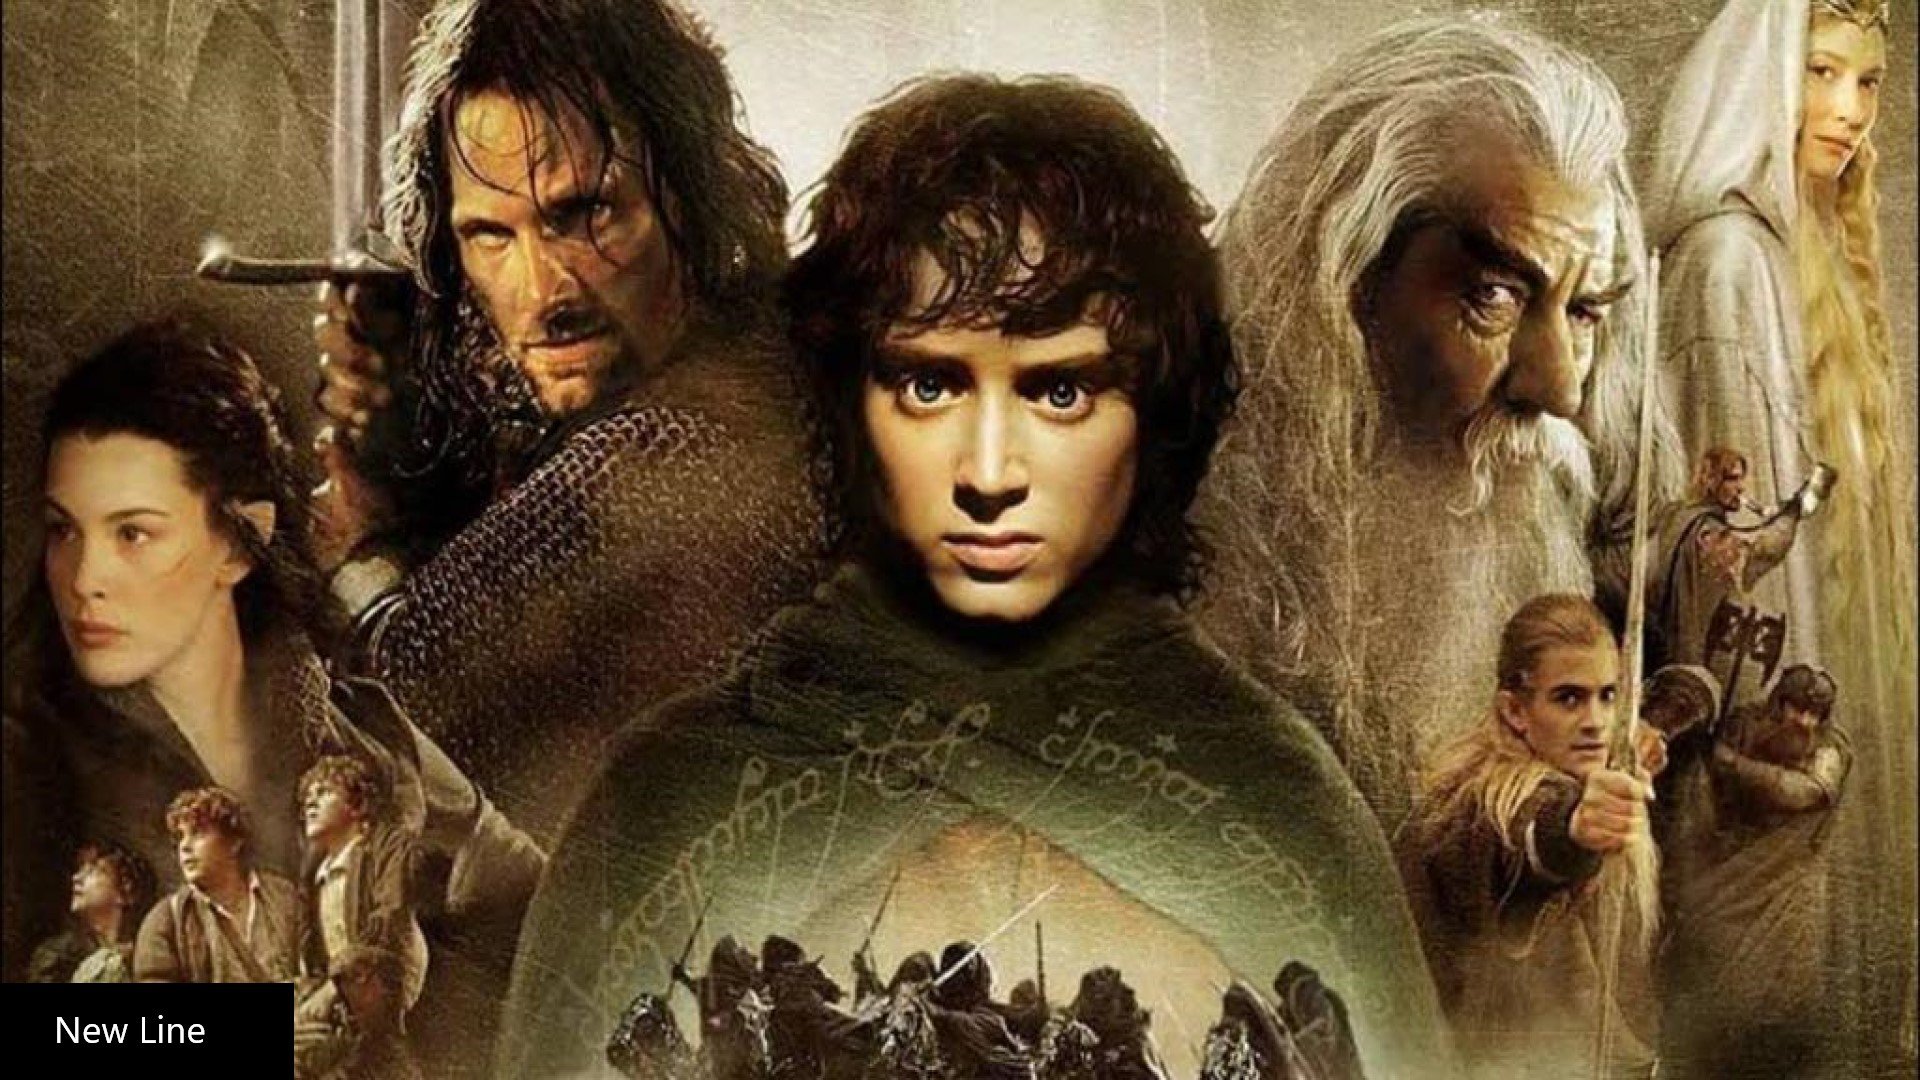 Dungeons and Dragons movies - Lord of the Rings: The Fellowship of the Ring movie poster